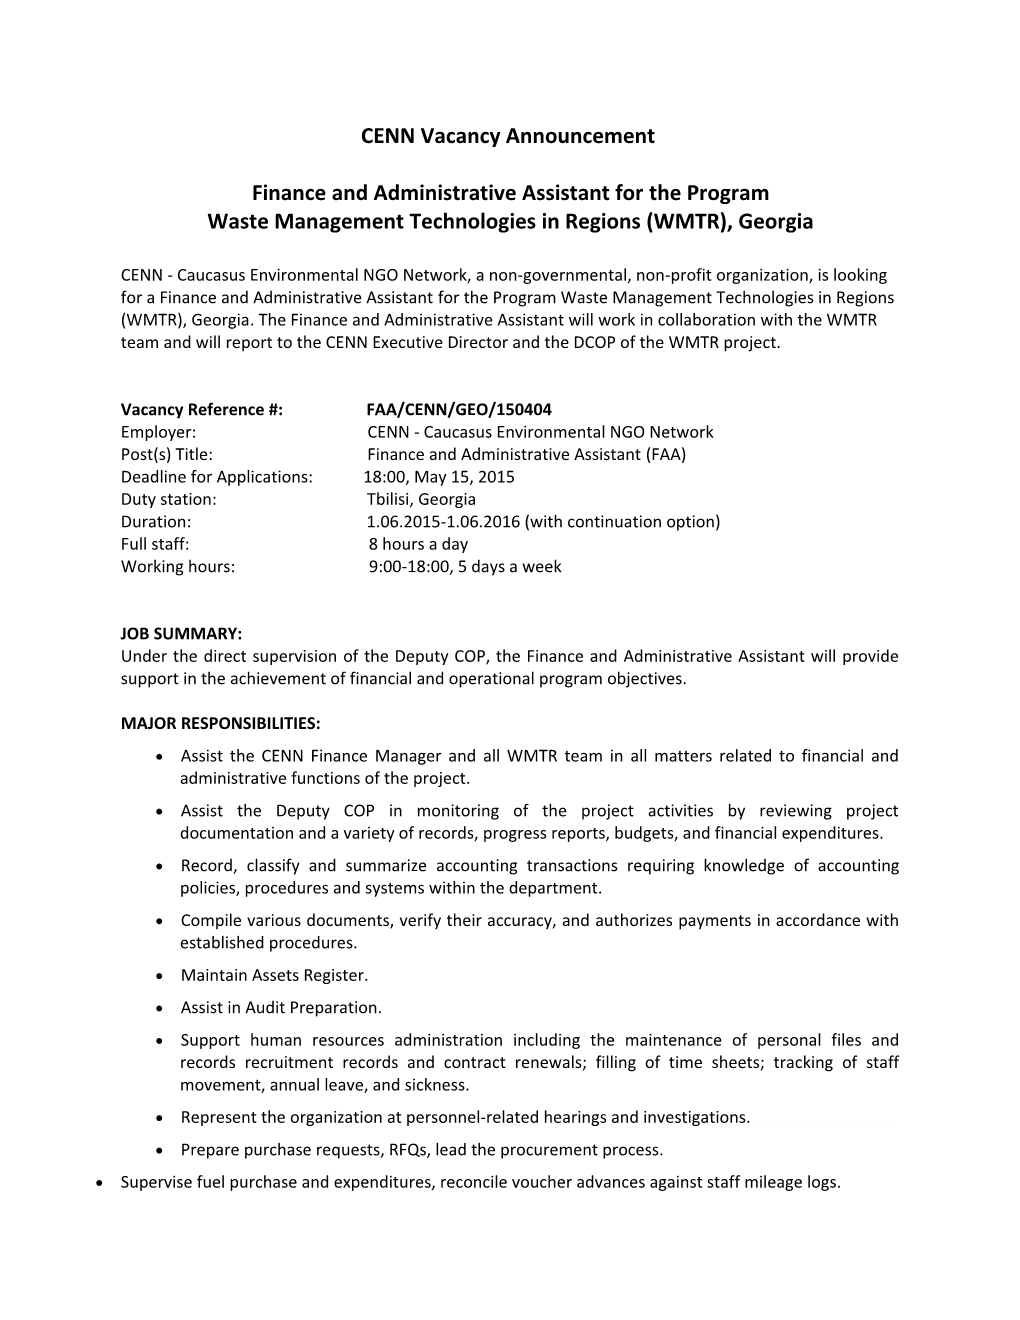 Finance and Administrative Assistantfor the Program